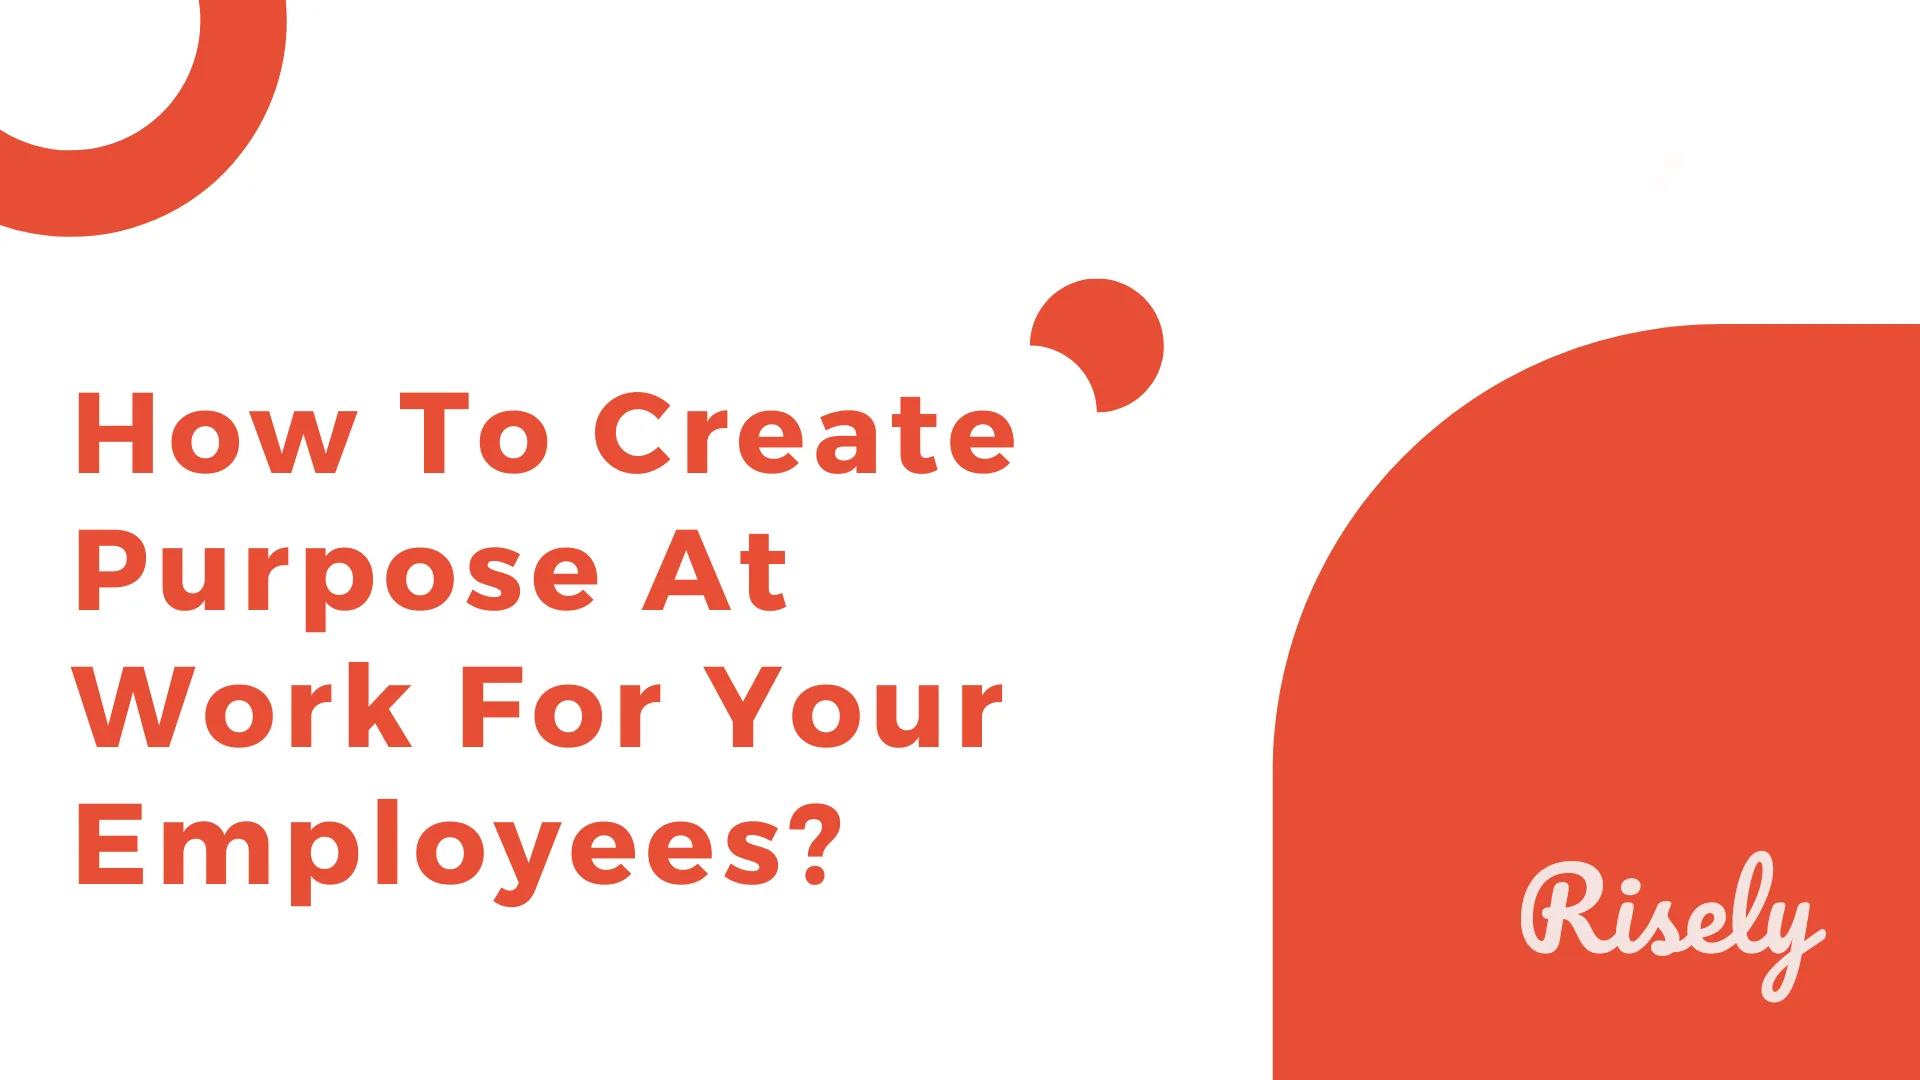 How To Create Purpose At Work For Your Employees?